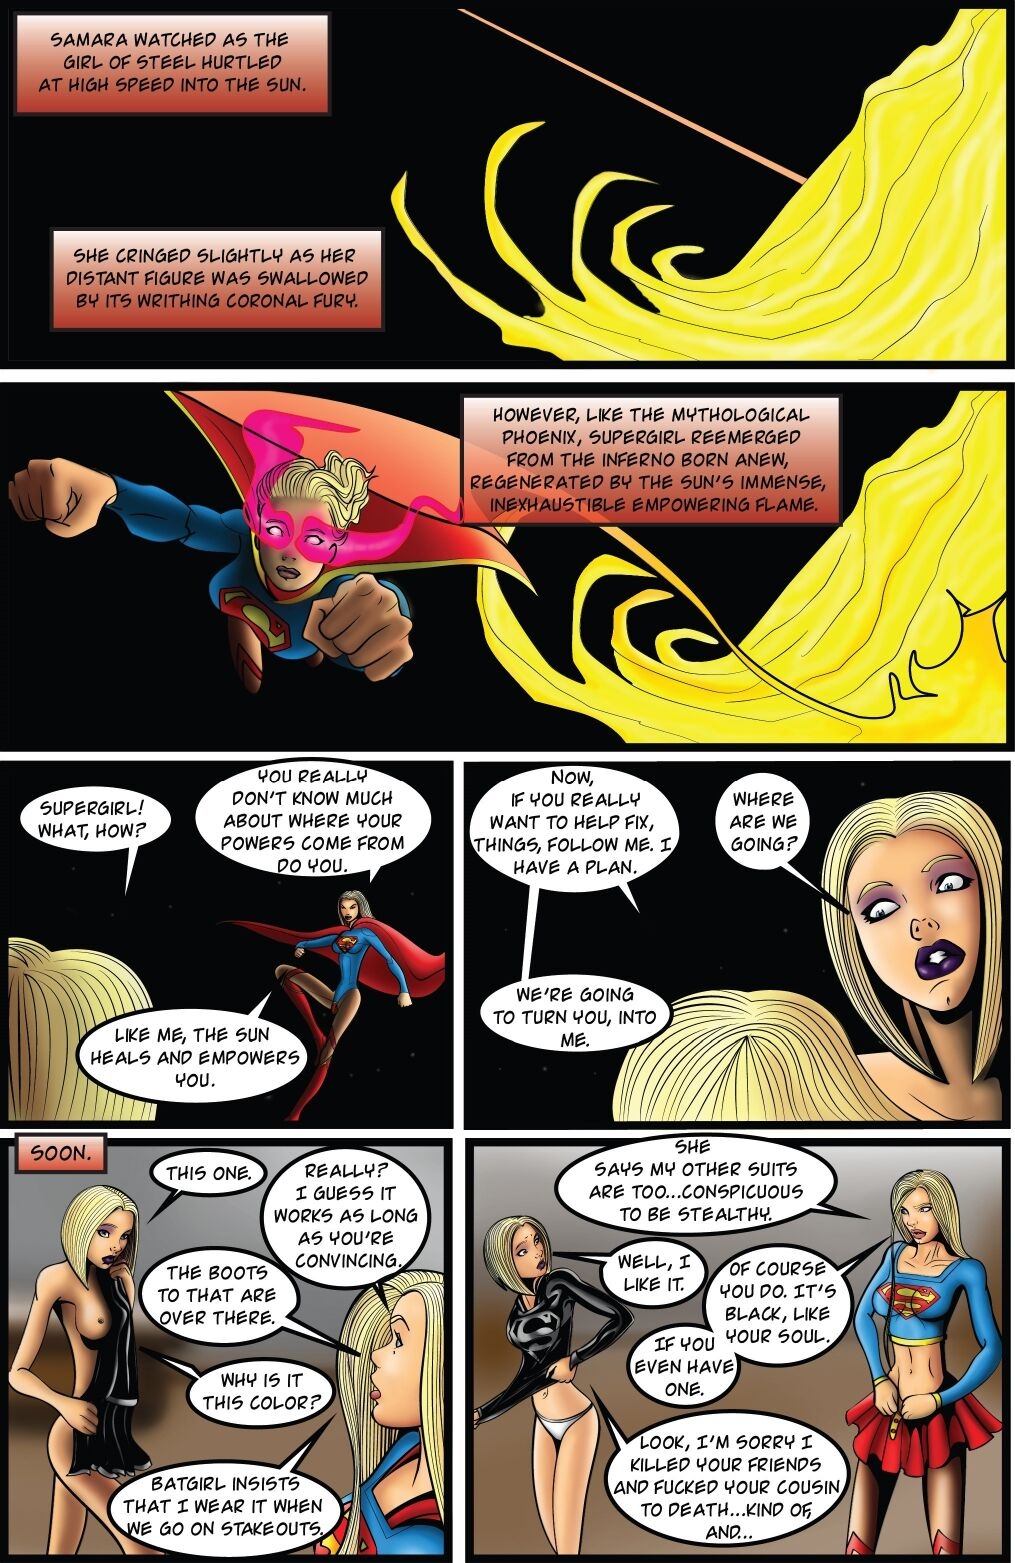 Supergirl: Issue #10 - Countdown to Extinction Part 3 39